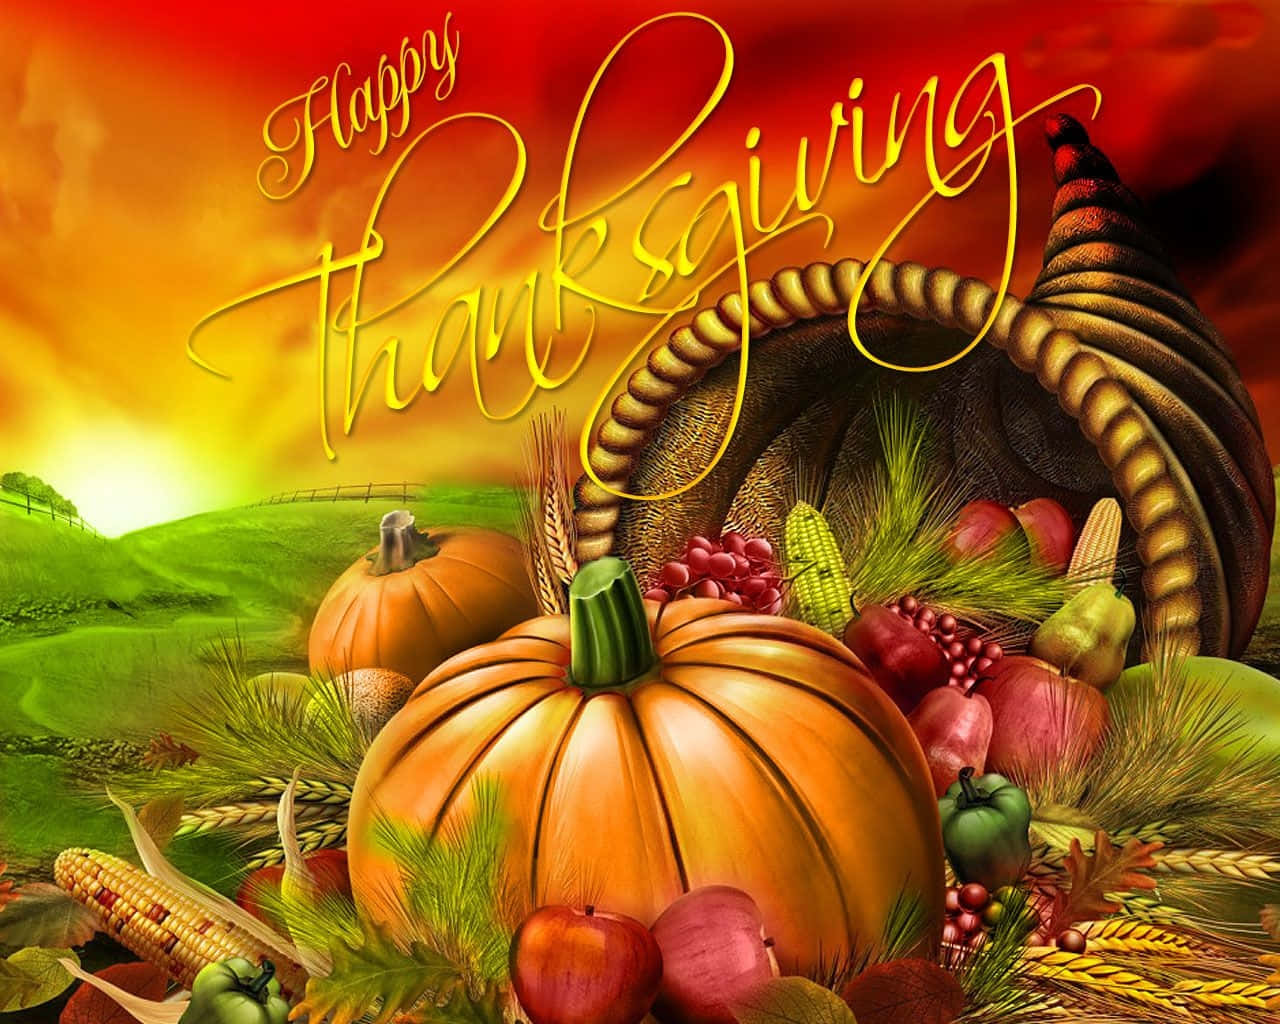 "Wishing you a Happy Thanksgiving filled with moments of joy and gratitude" Wallpaper